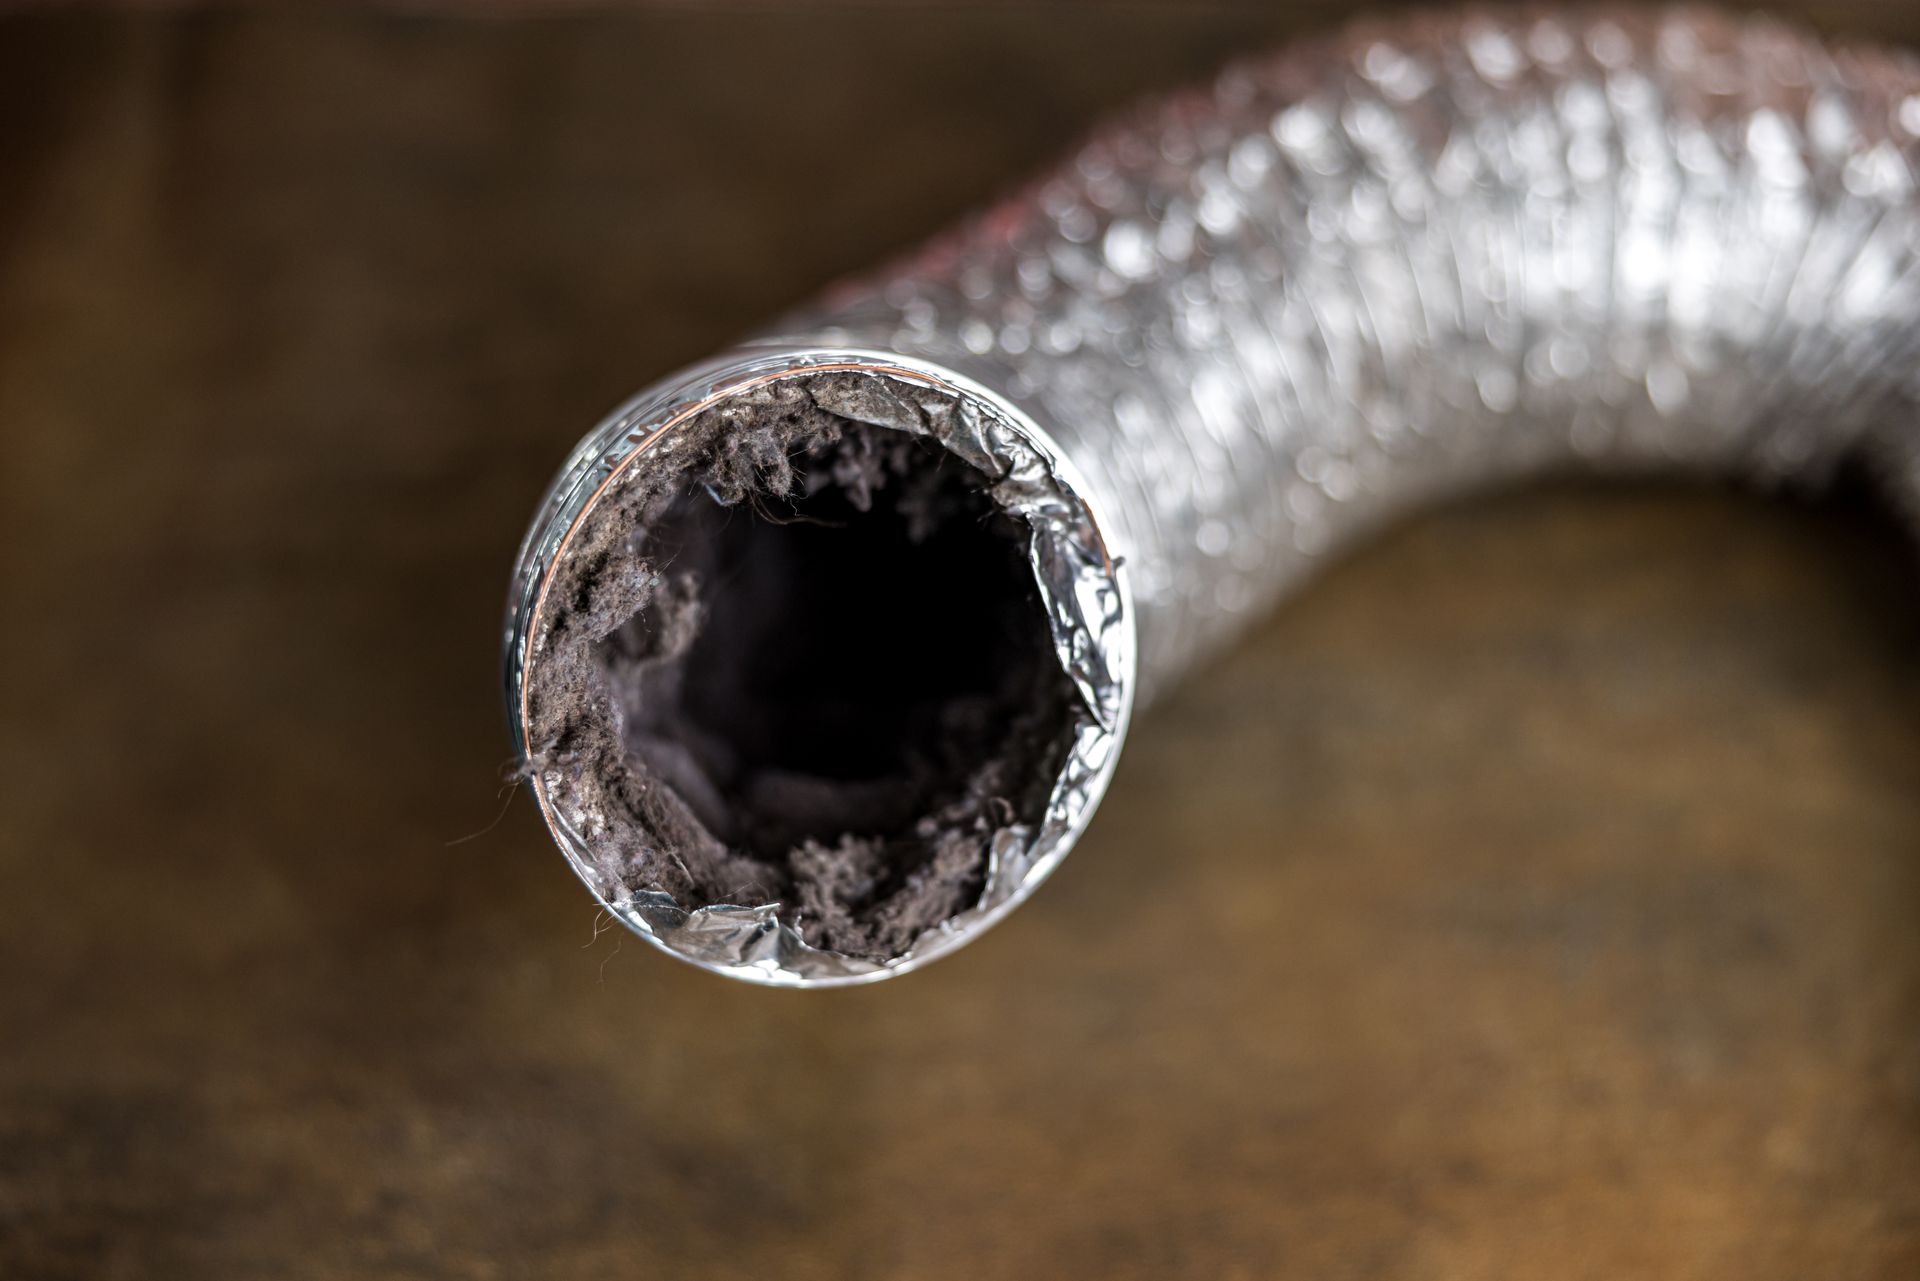 HVAC Duct Cleaning in the Baton Rouge: The Benefits of Preventative Maintenance